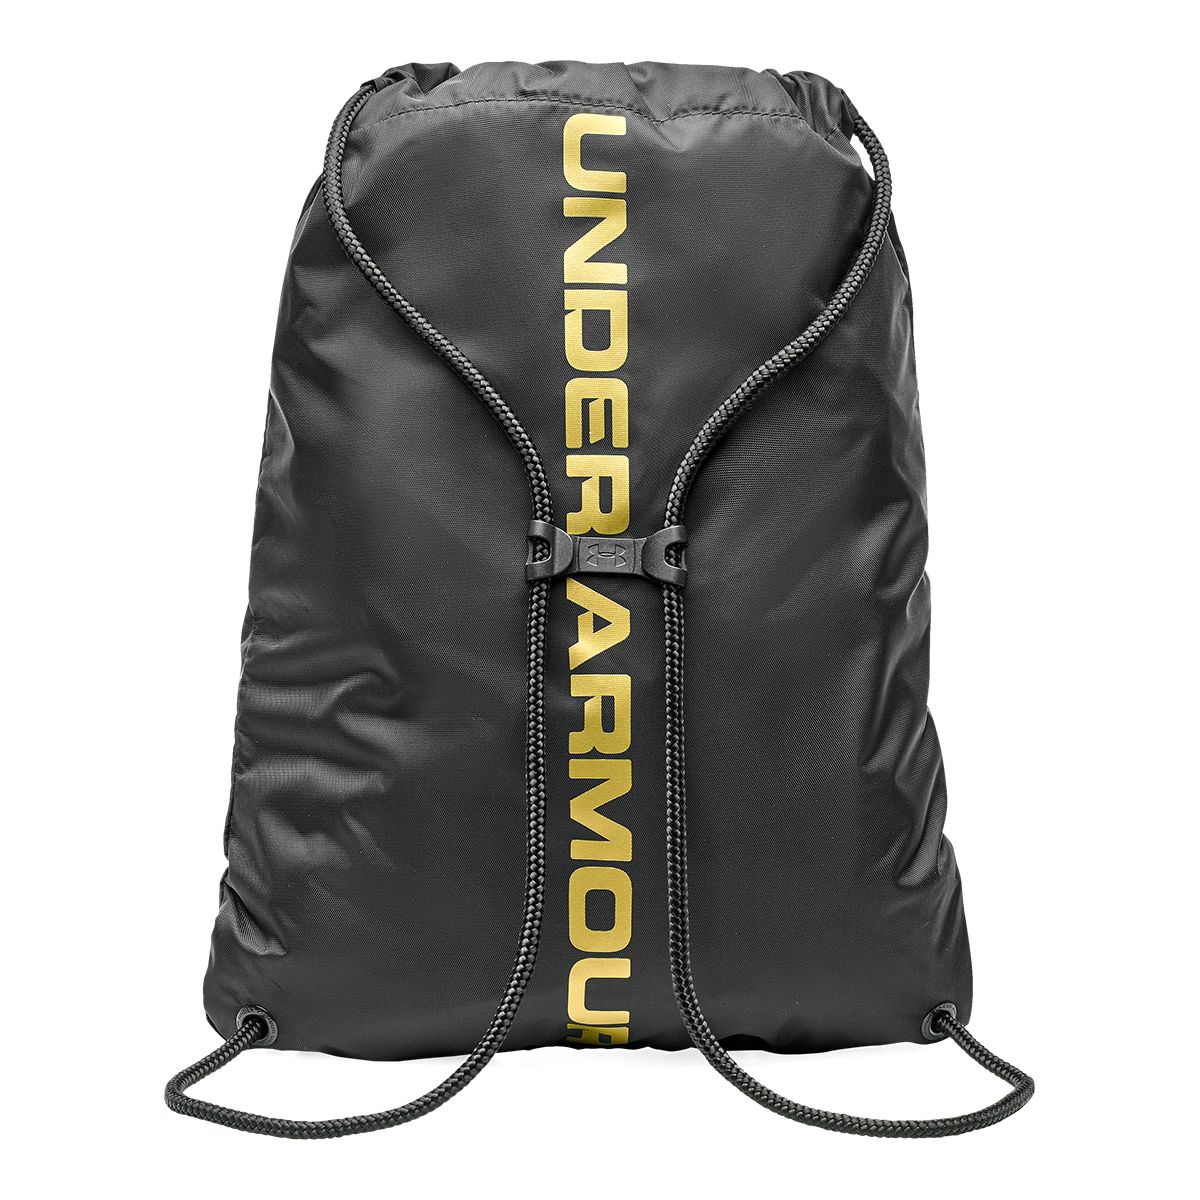 Backpack Under Armour Gymsack Ozsee 1240539-410